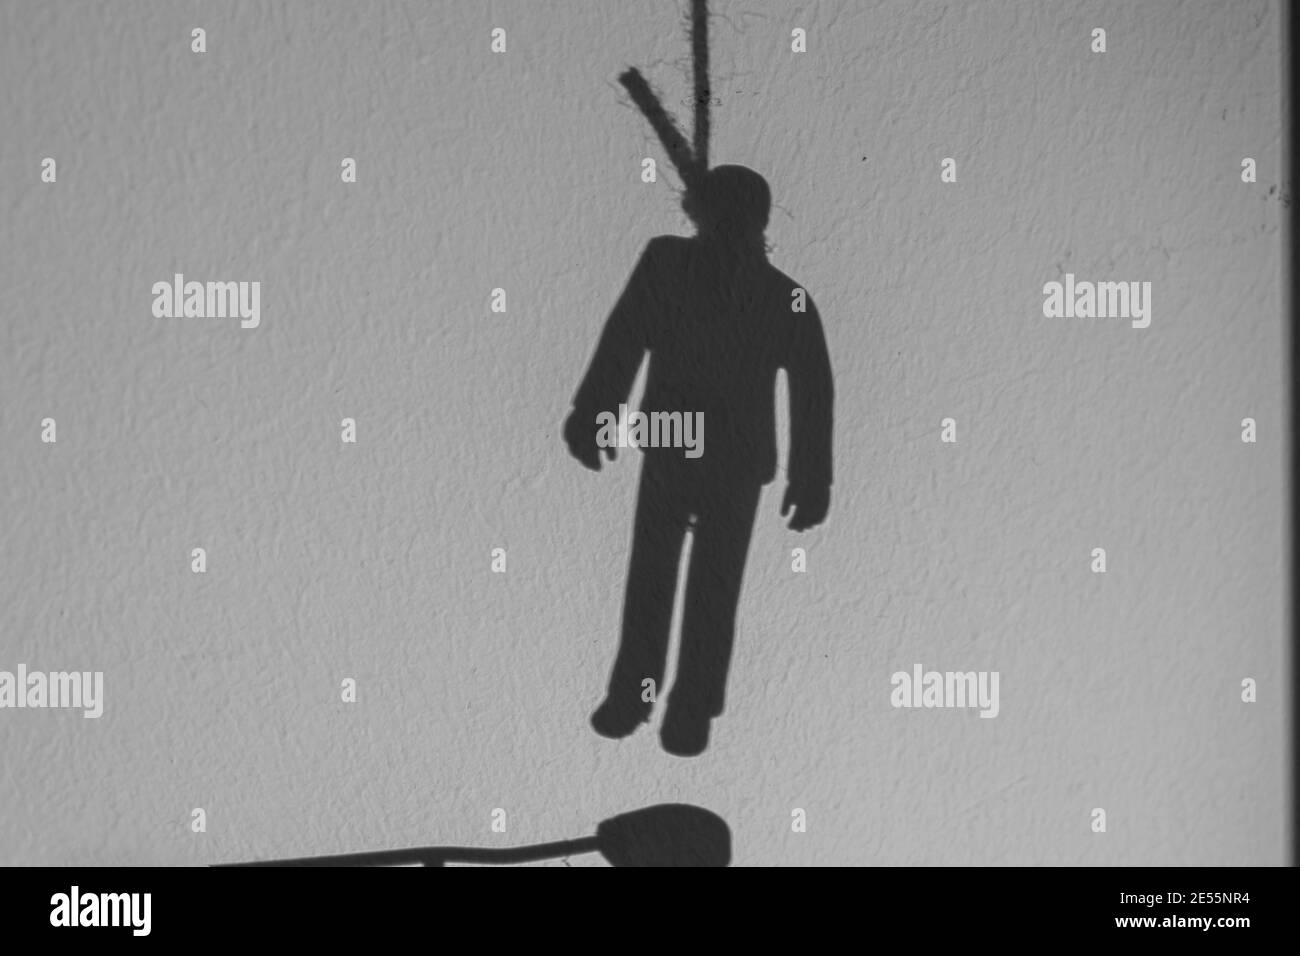 Shadow of depressed man hanging suicide Stock Photo